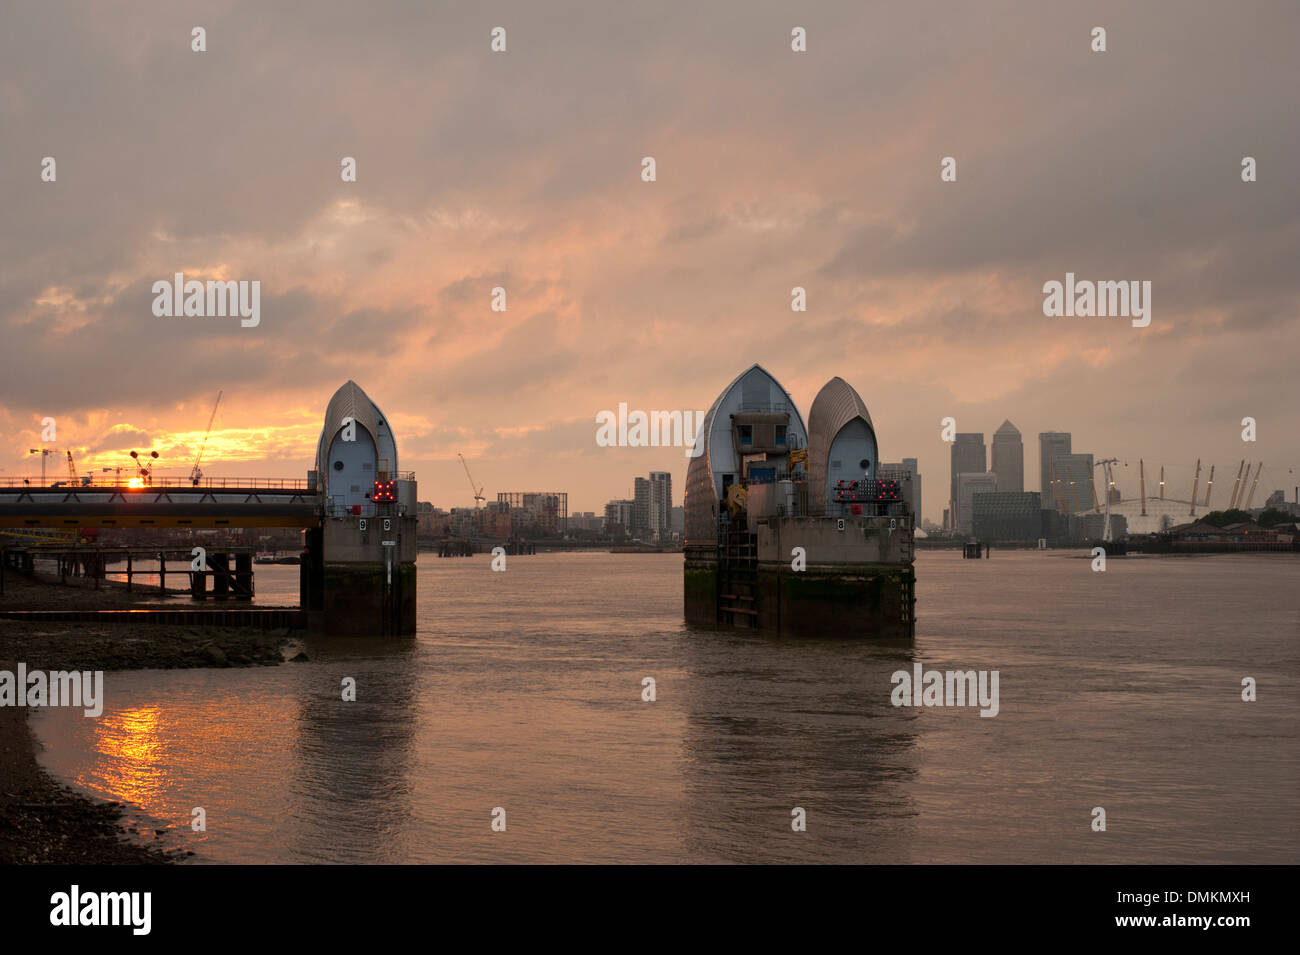 View of the Thames Barrier, a movable flood barrier, at sunset, Woolwich Reach, Woolwich, Royal Borough of Greenwich, London, UK Stock Photo